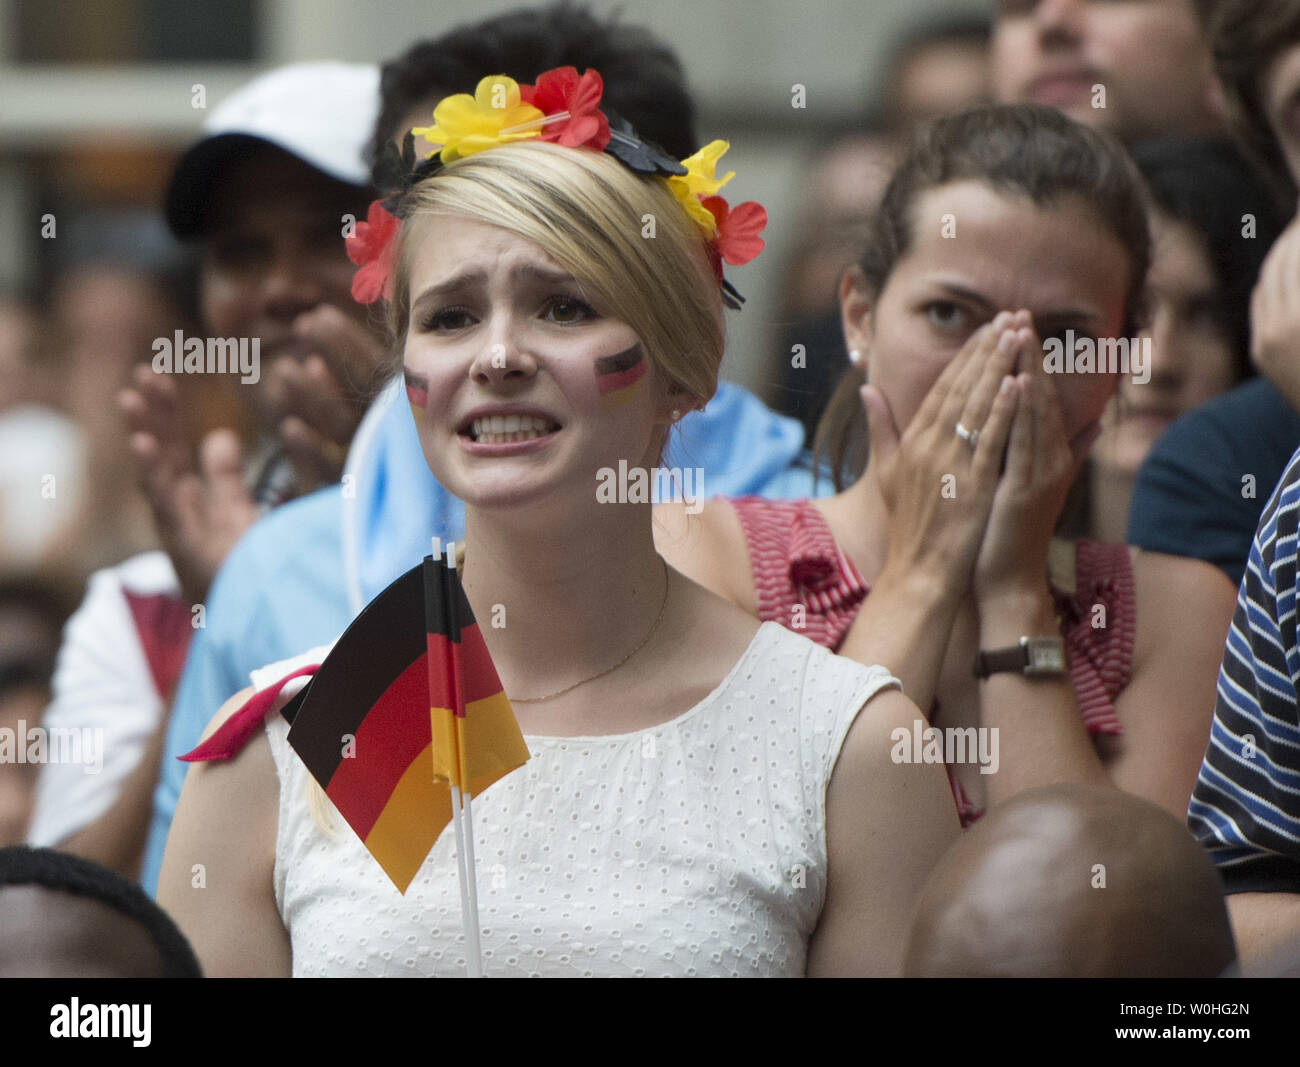 Fans watch the 2014 World Cup final between Germany and Argentina during a watch party held at the Smithsonian Portrait Gallery, in Washington, D.C. on July 13, 2014. Germany defeated Argentina 1-0. UPI/Kevin Dietsch Stock Photo